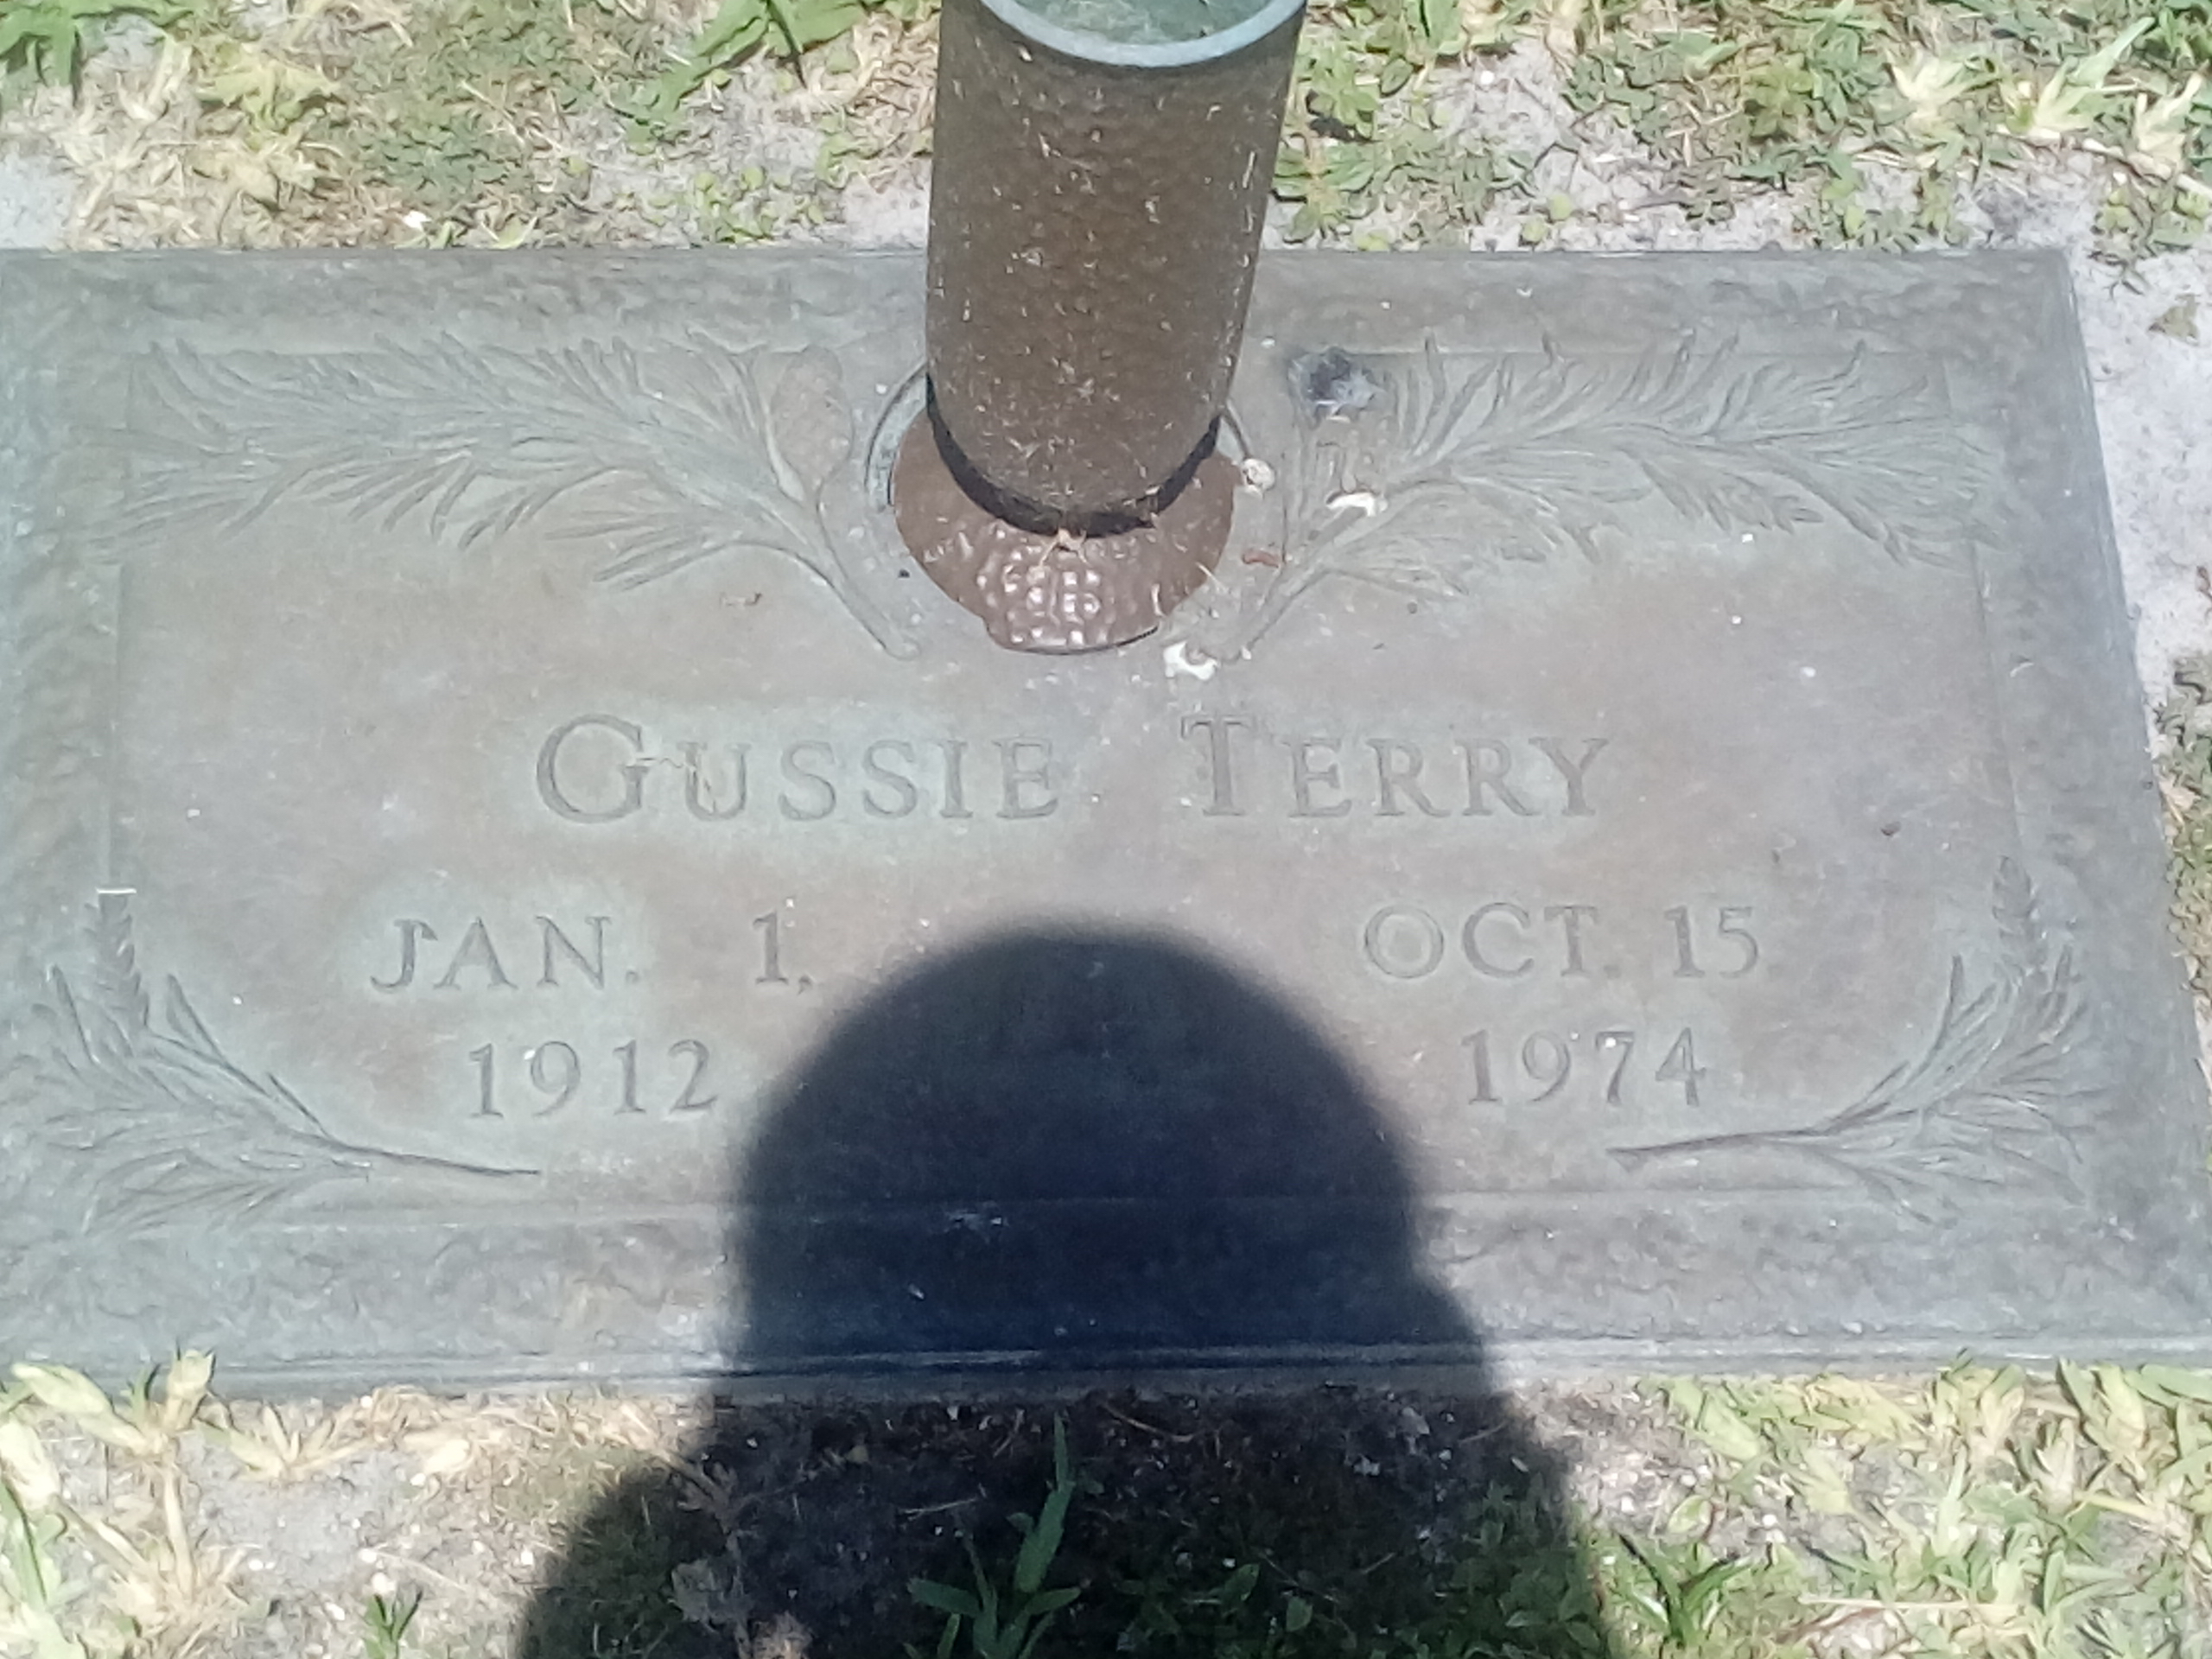 Gussie Terry